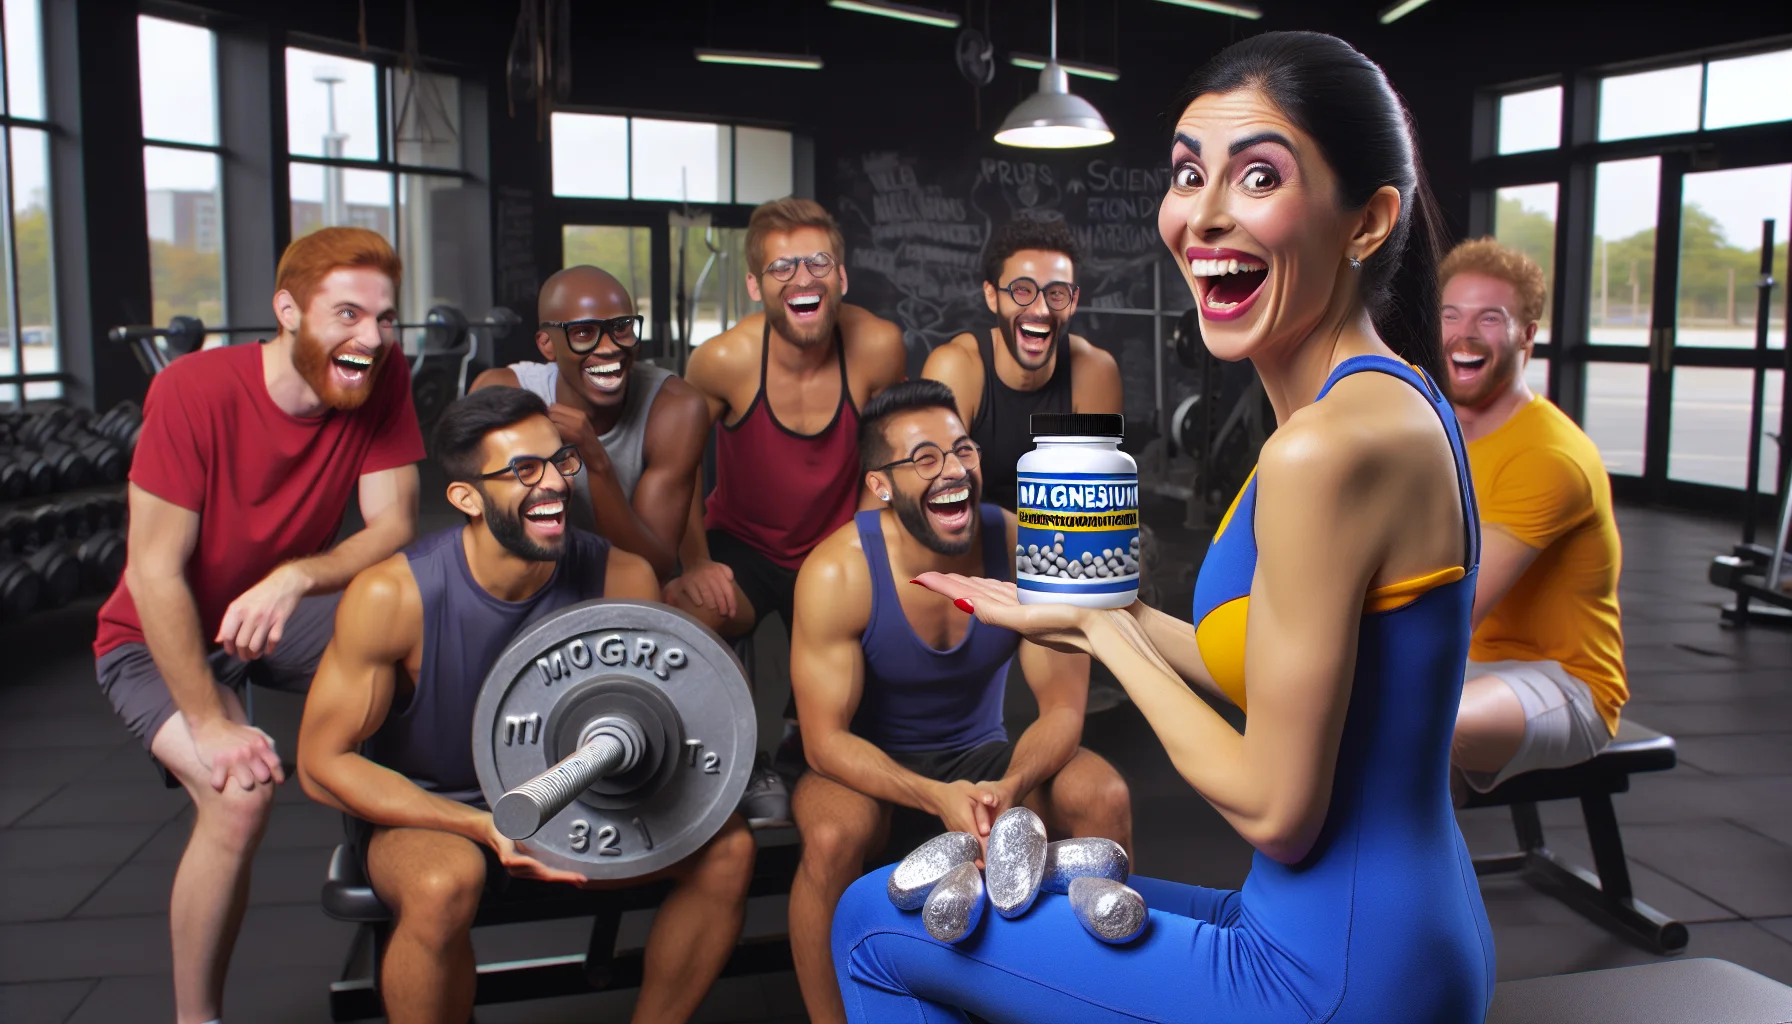 Create an amusing realistic image to draw people's attention towards the importance of magnesium supplementation for sports. It shows a hilarious scene in a gym where a comedic Hispanic female fitness instructor is holding a magnified three-dimensional model of magnesium's molar mass and a magnesium supplement bottle, explaining the science behind it to a diverse group of amused athletes who are chuckling at her jokes. The gym setting includes various types of fitness equipment in the background.